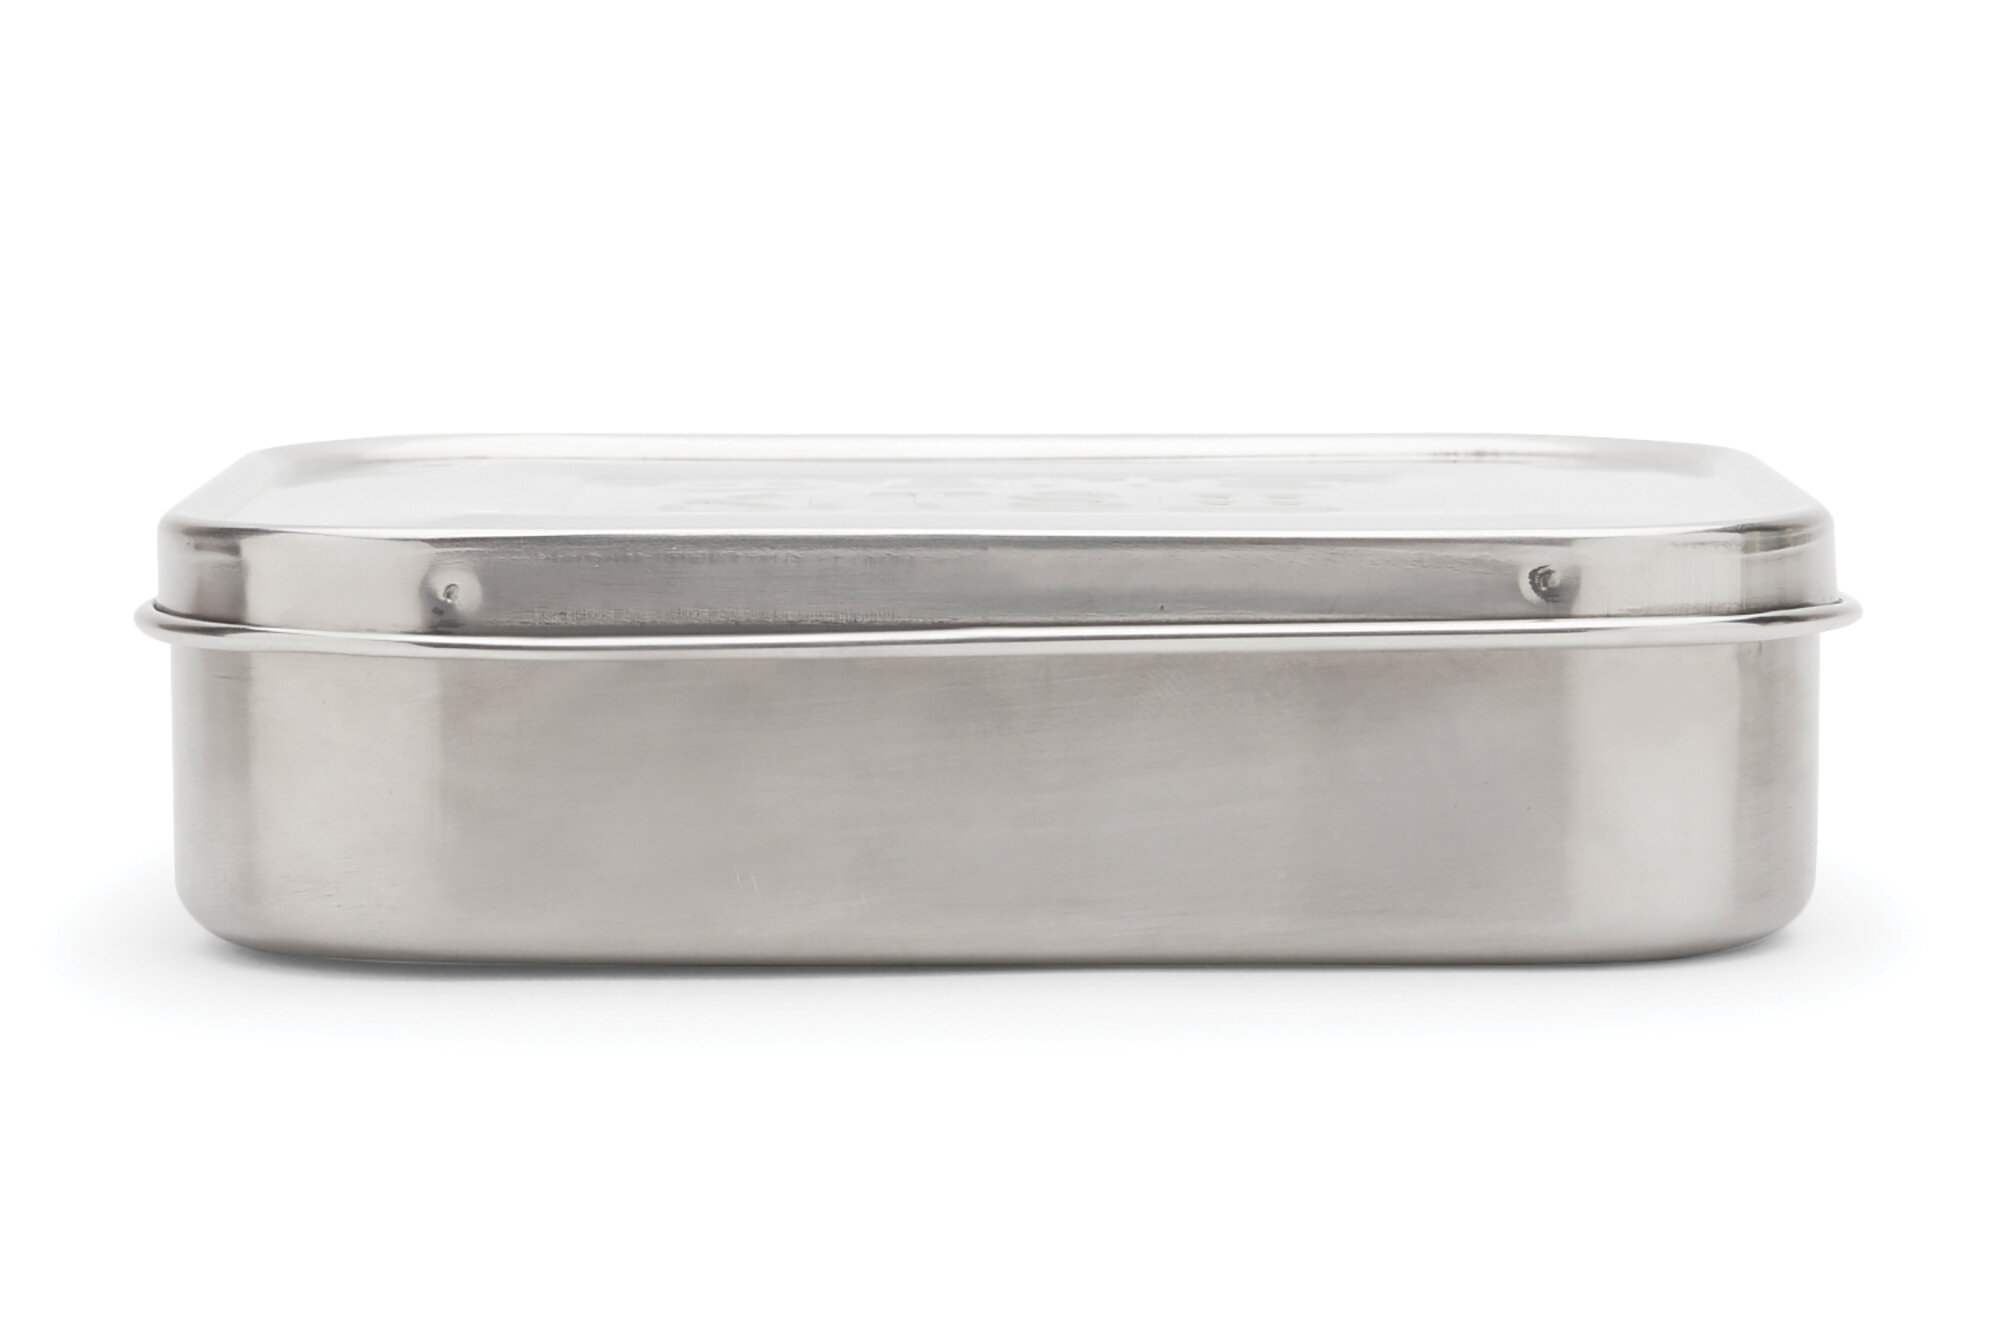 LunchBots Uno Stainless Steel Food Container - Open Design